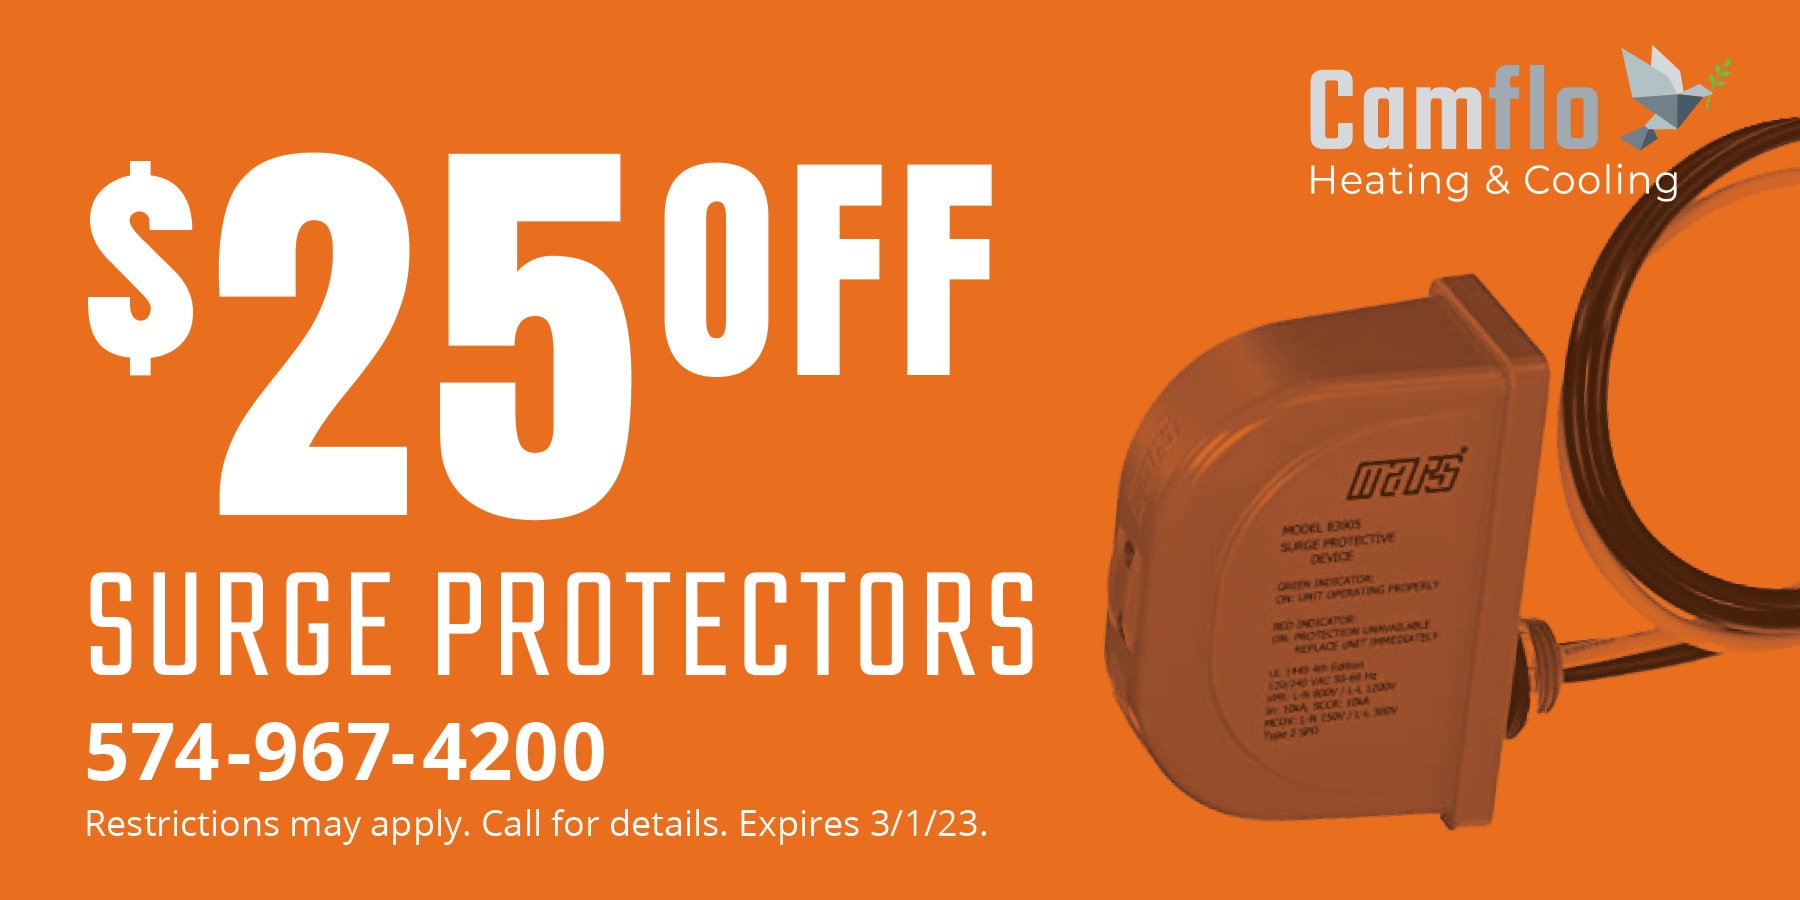 $25 off surge protectors. Camflo heating & cooling.